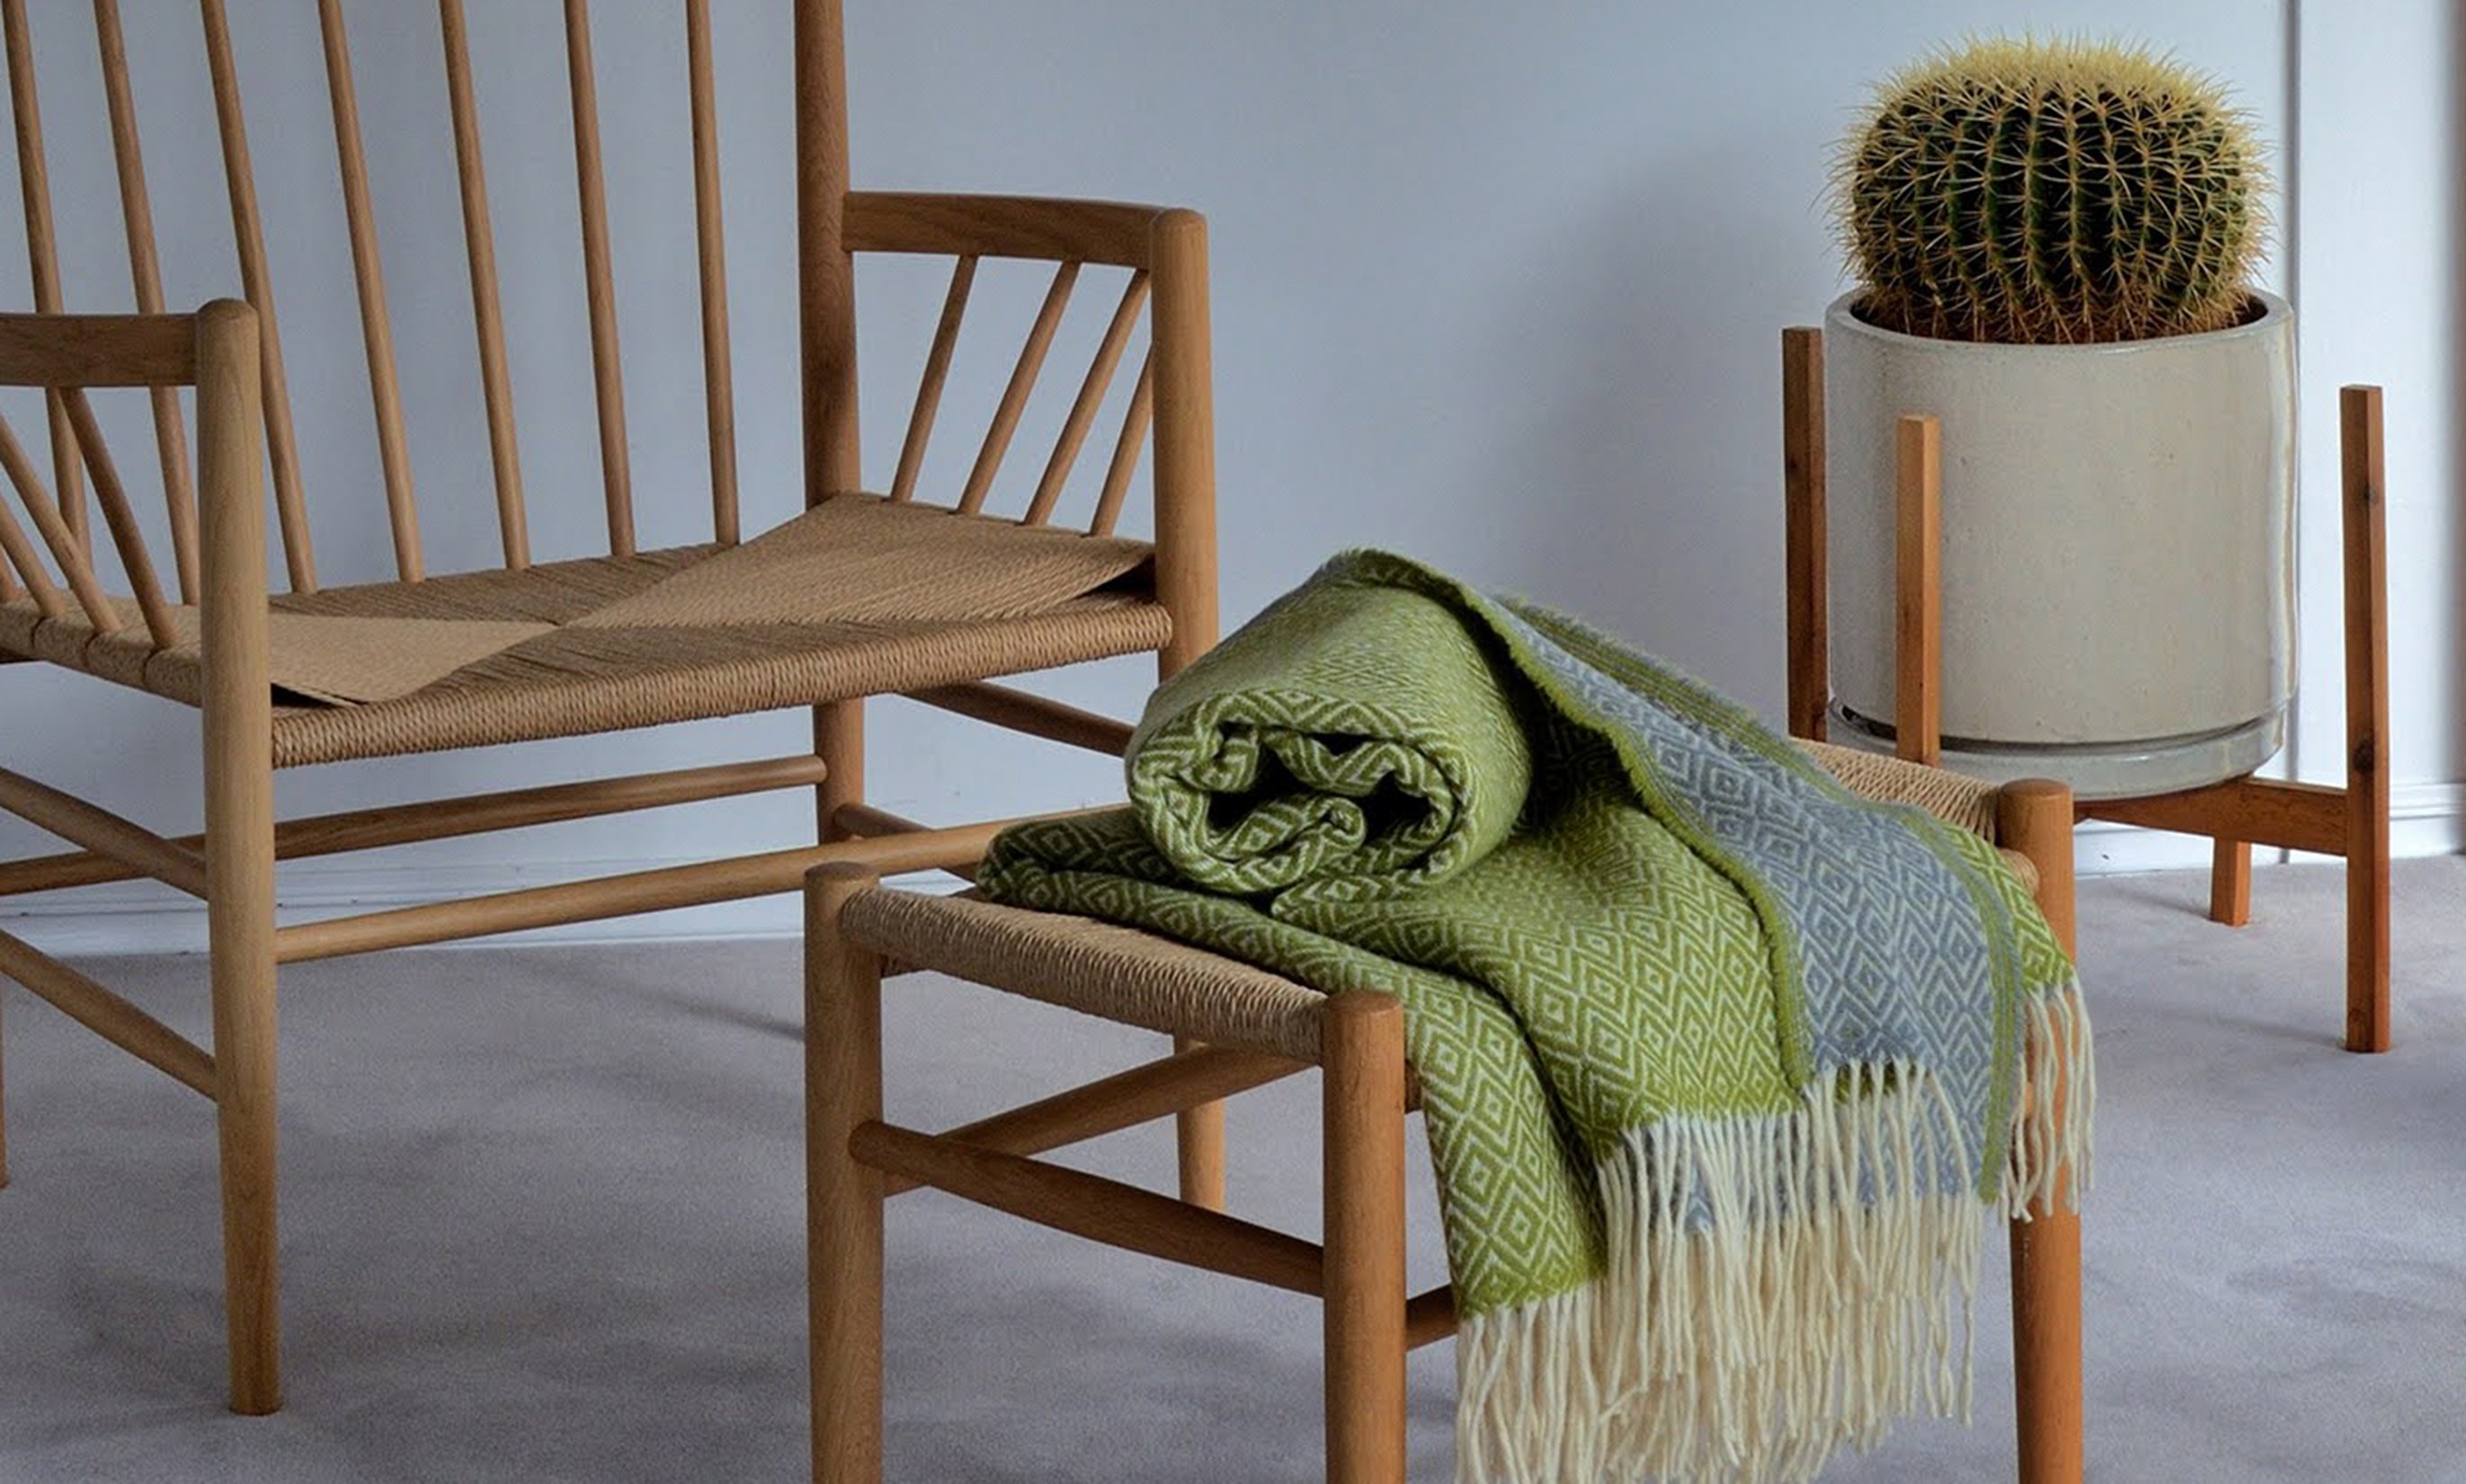 1432-chicoracao-blanket-wool-greenlightgray-cair-living-cactus